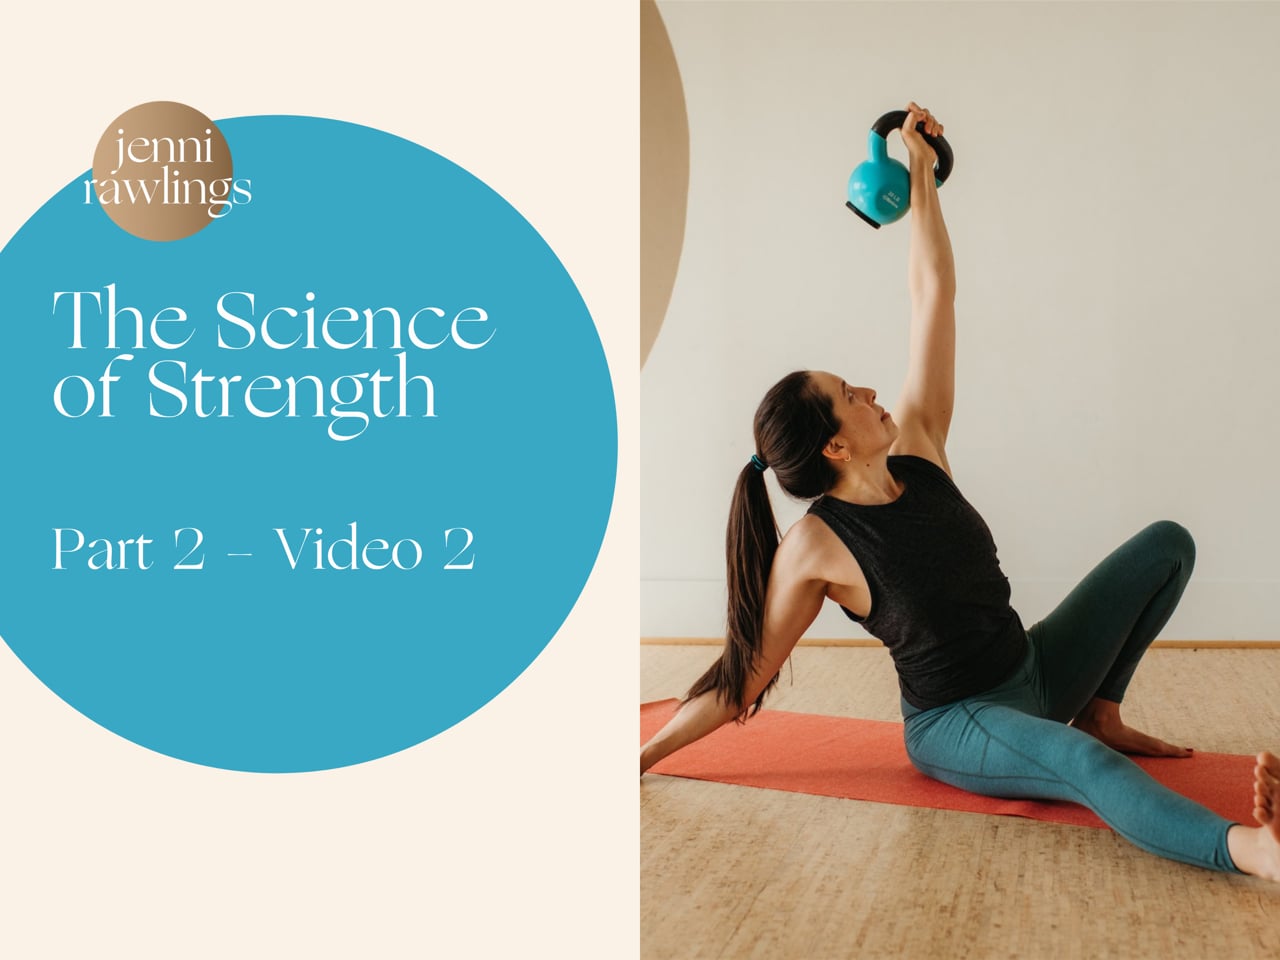 The Science of Strength Part 2, Video 2